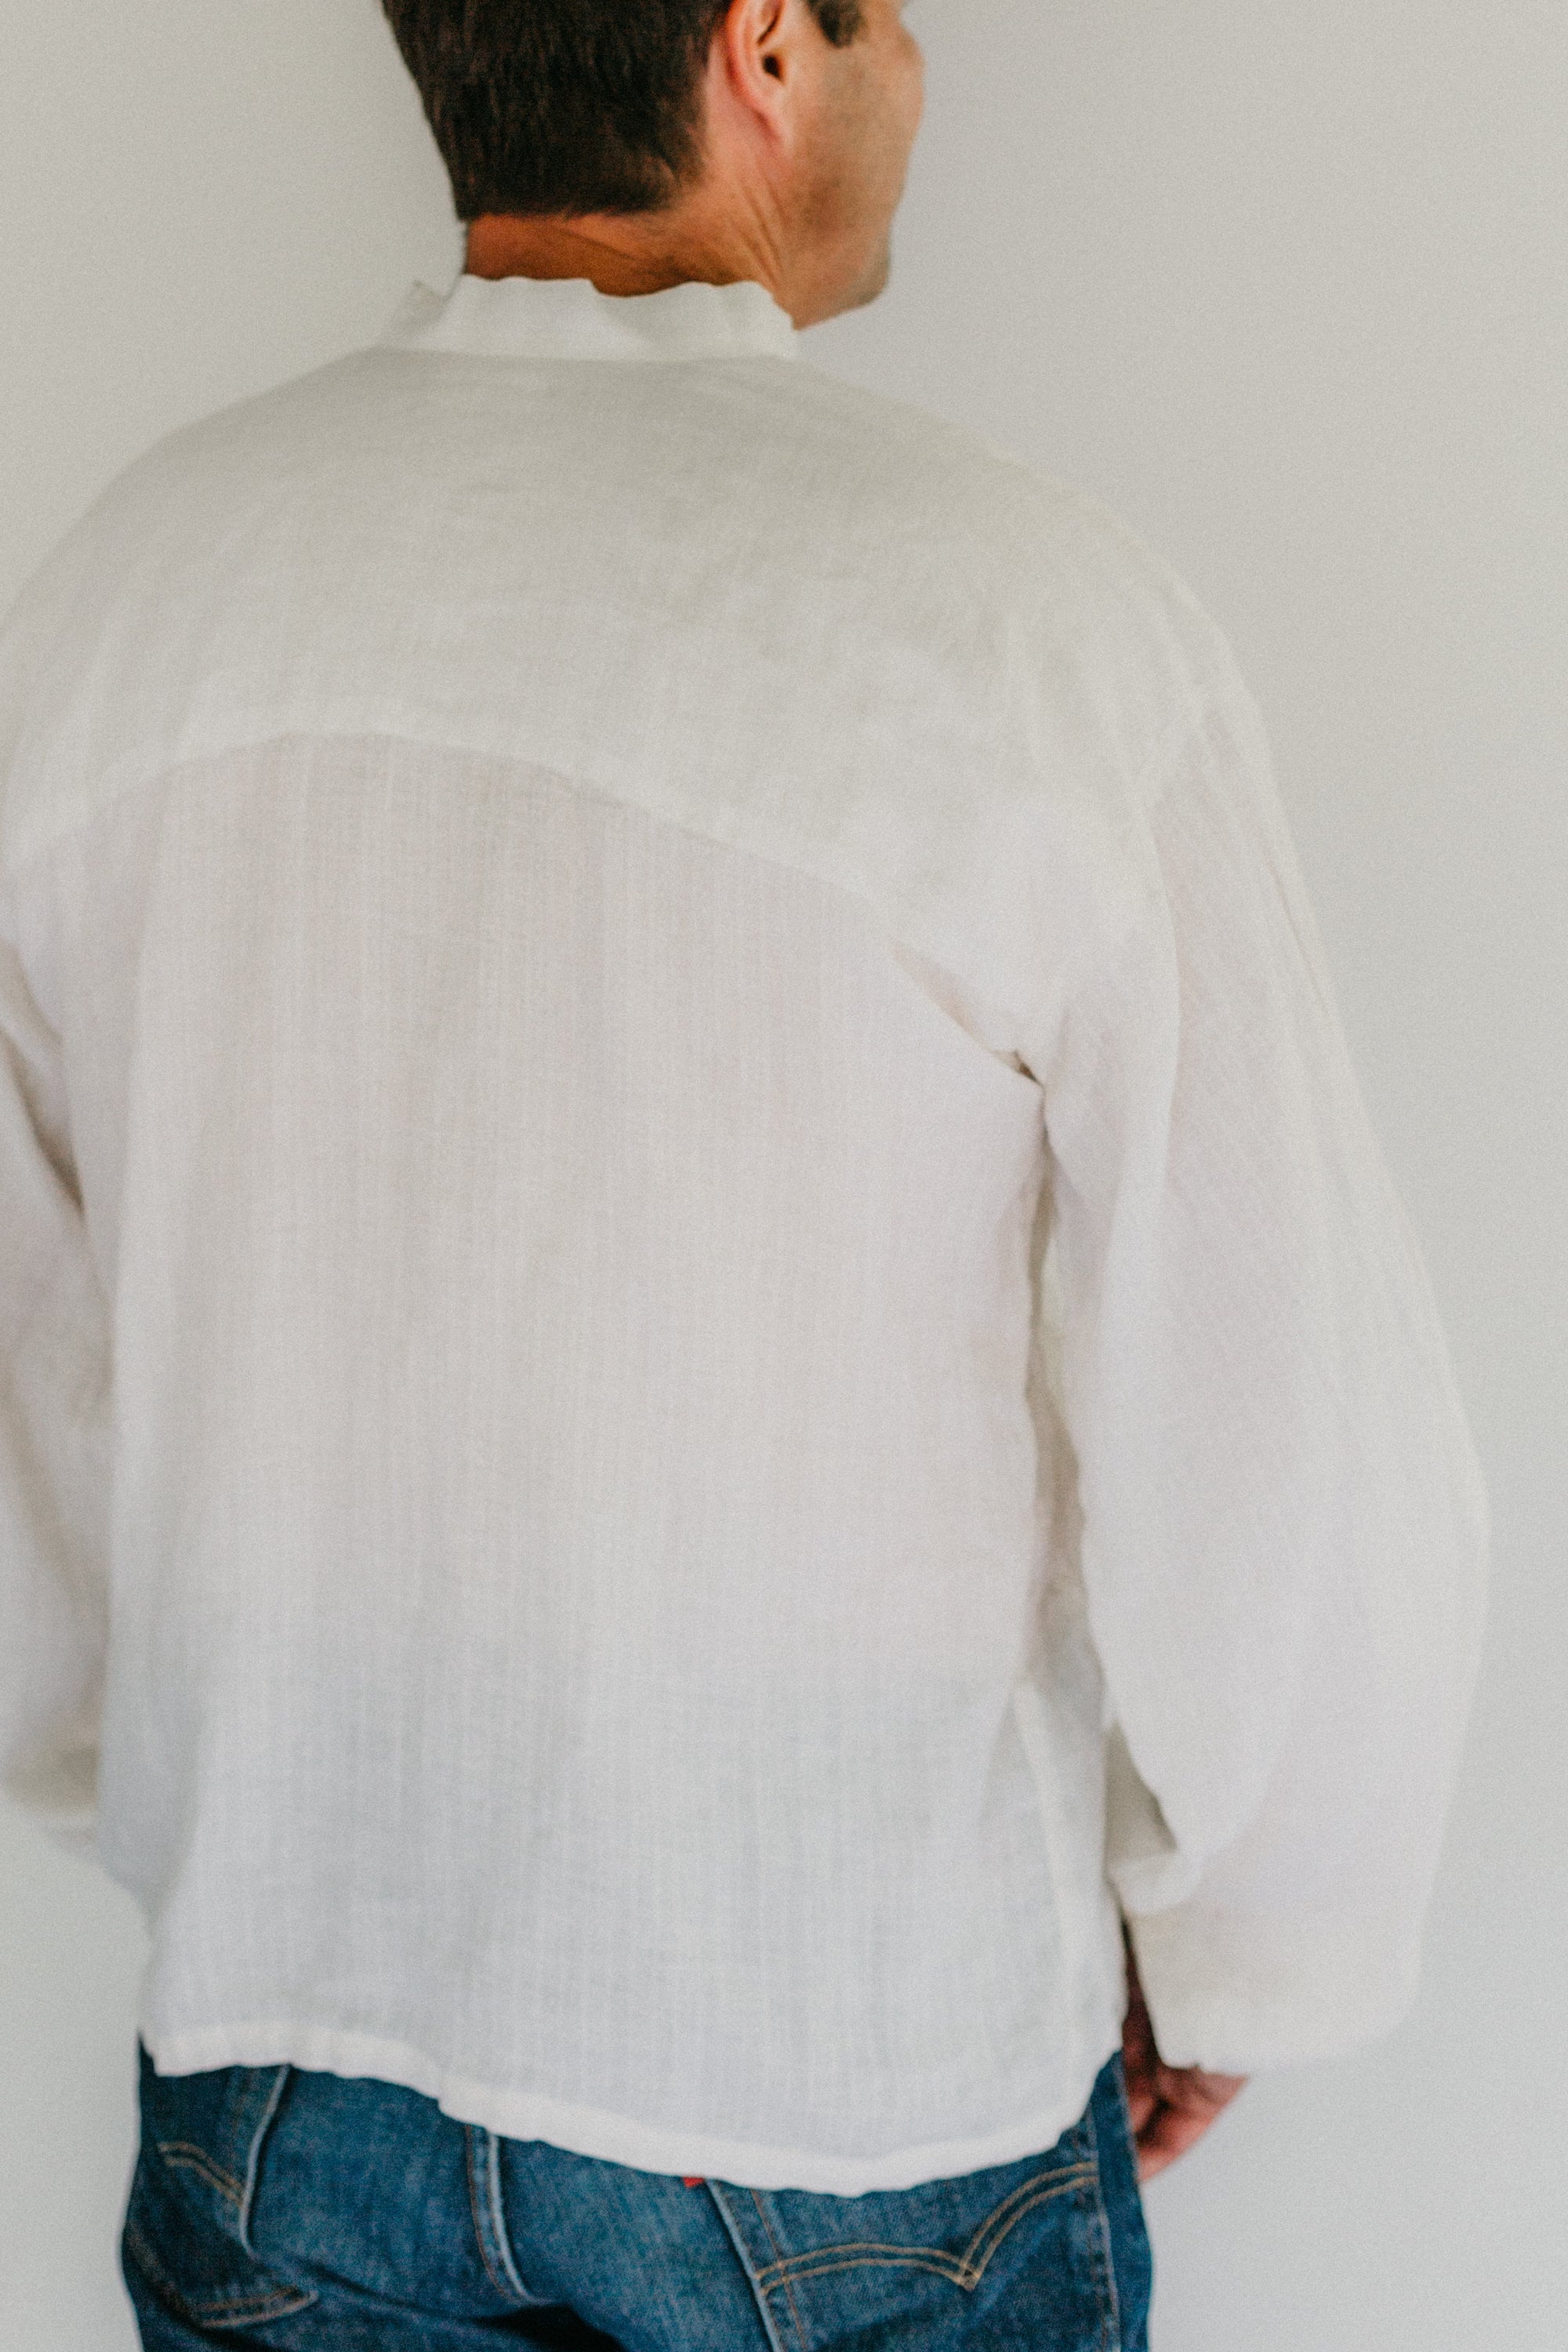 Back view of man wearing view B made in plain white cotton.  View A and C have the same back view.  View B has similar lines except for the gathered sleeves at cuffs